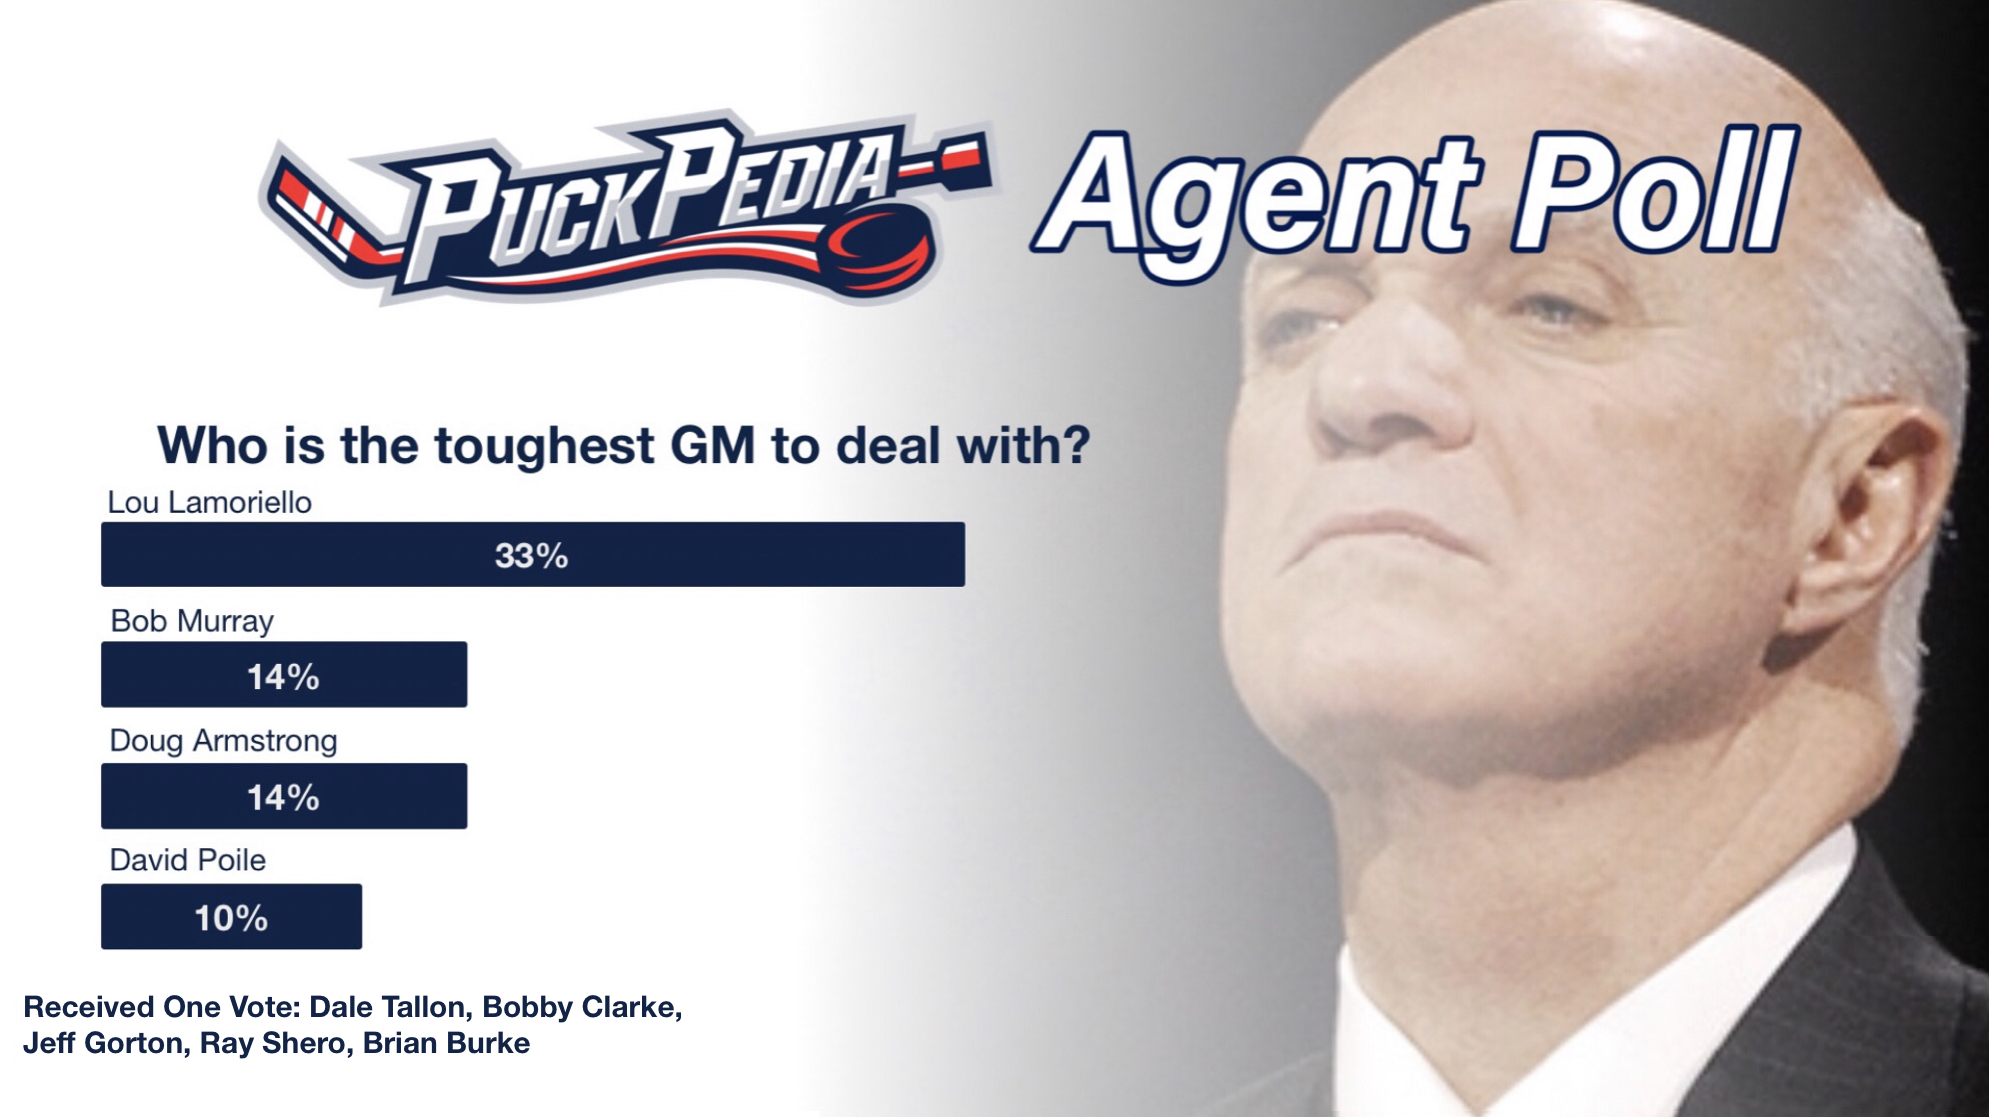 Who is the toughest GM to deal with